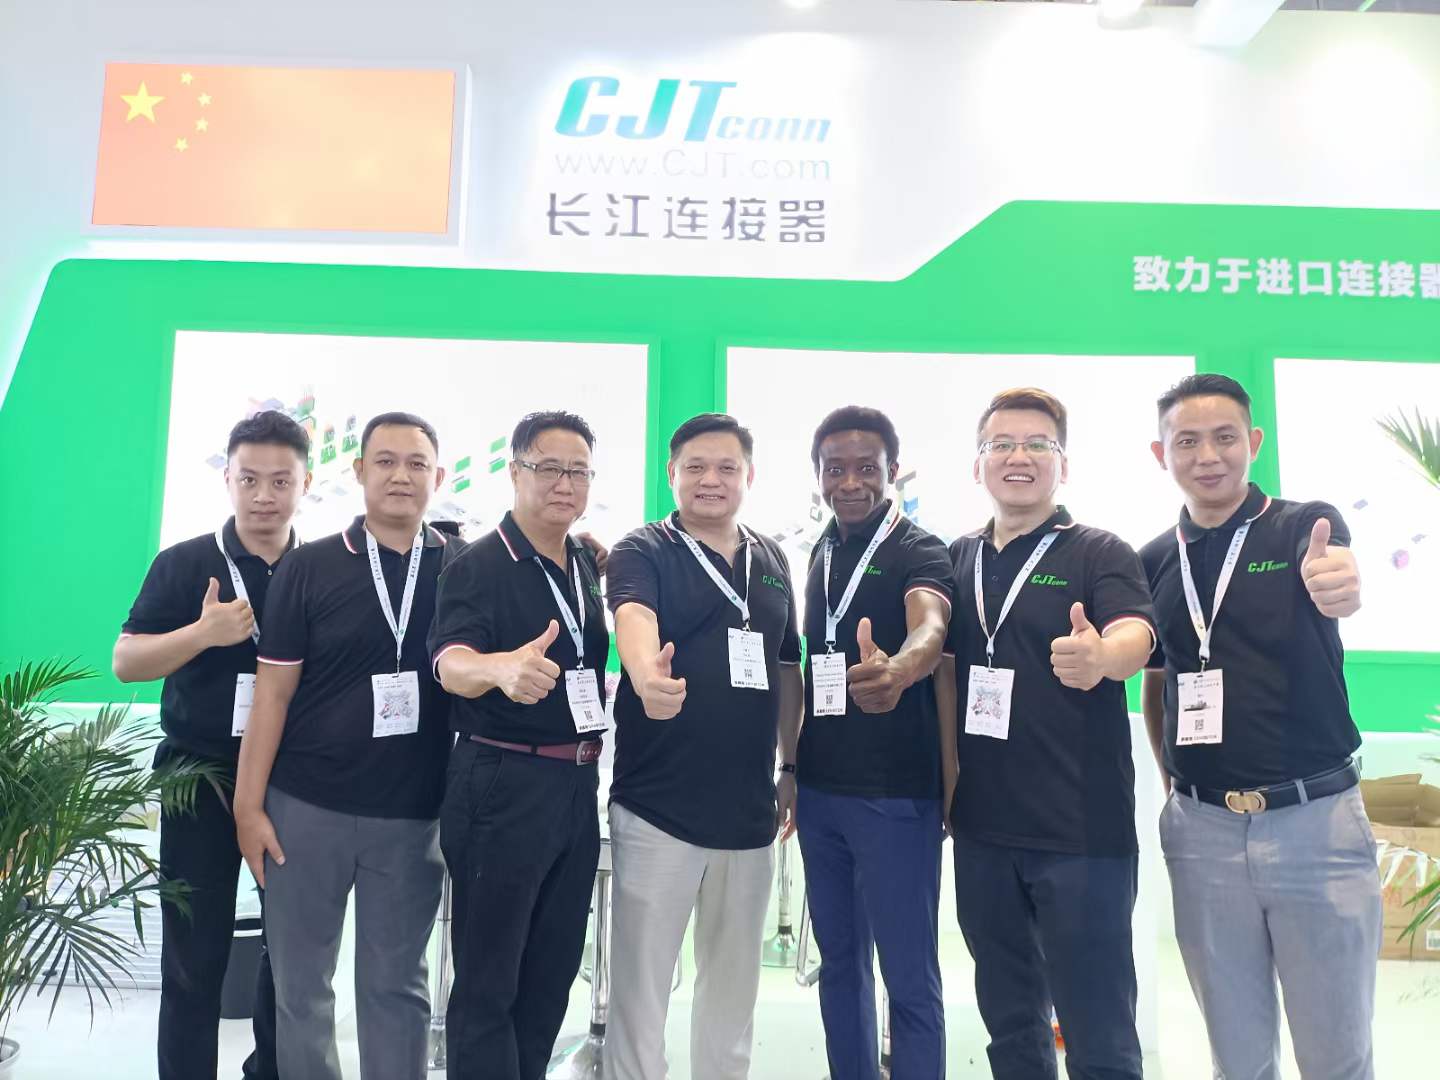 Exhibition Highlights | Changjiang connectors More Connection Solutions Highlights